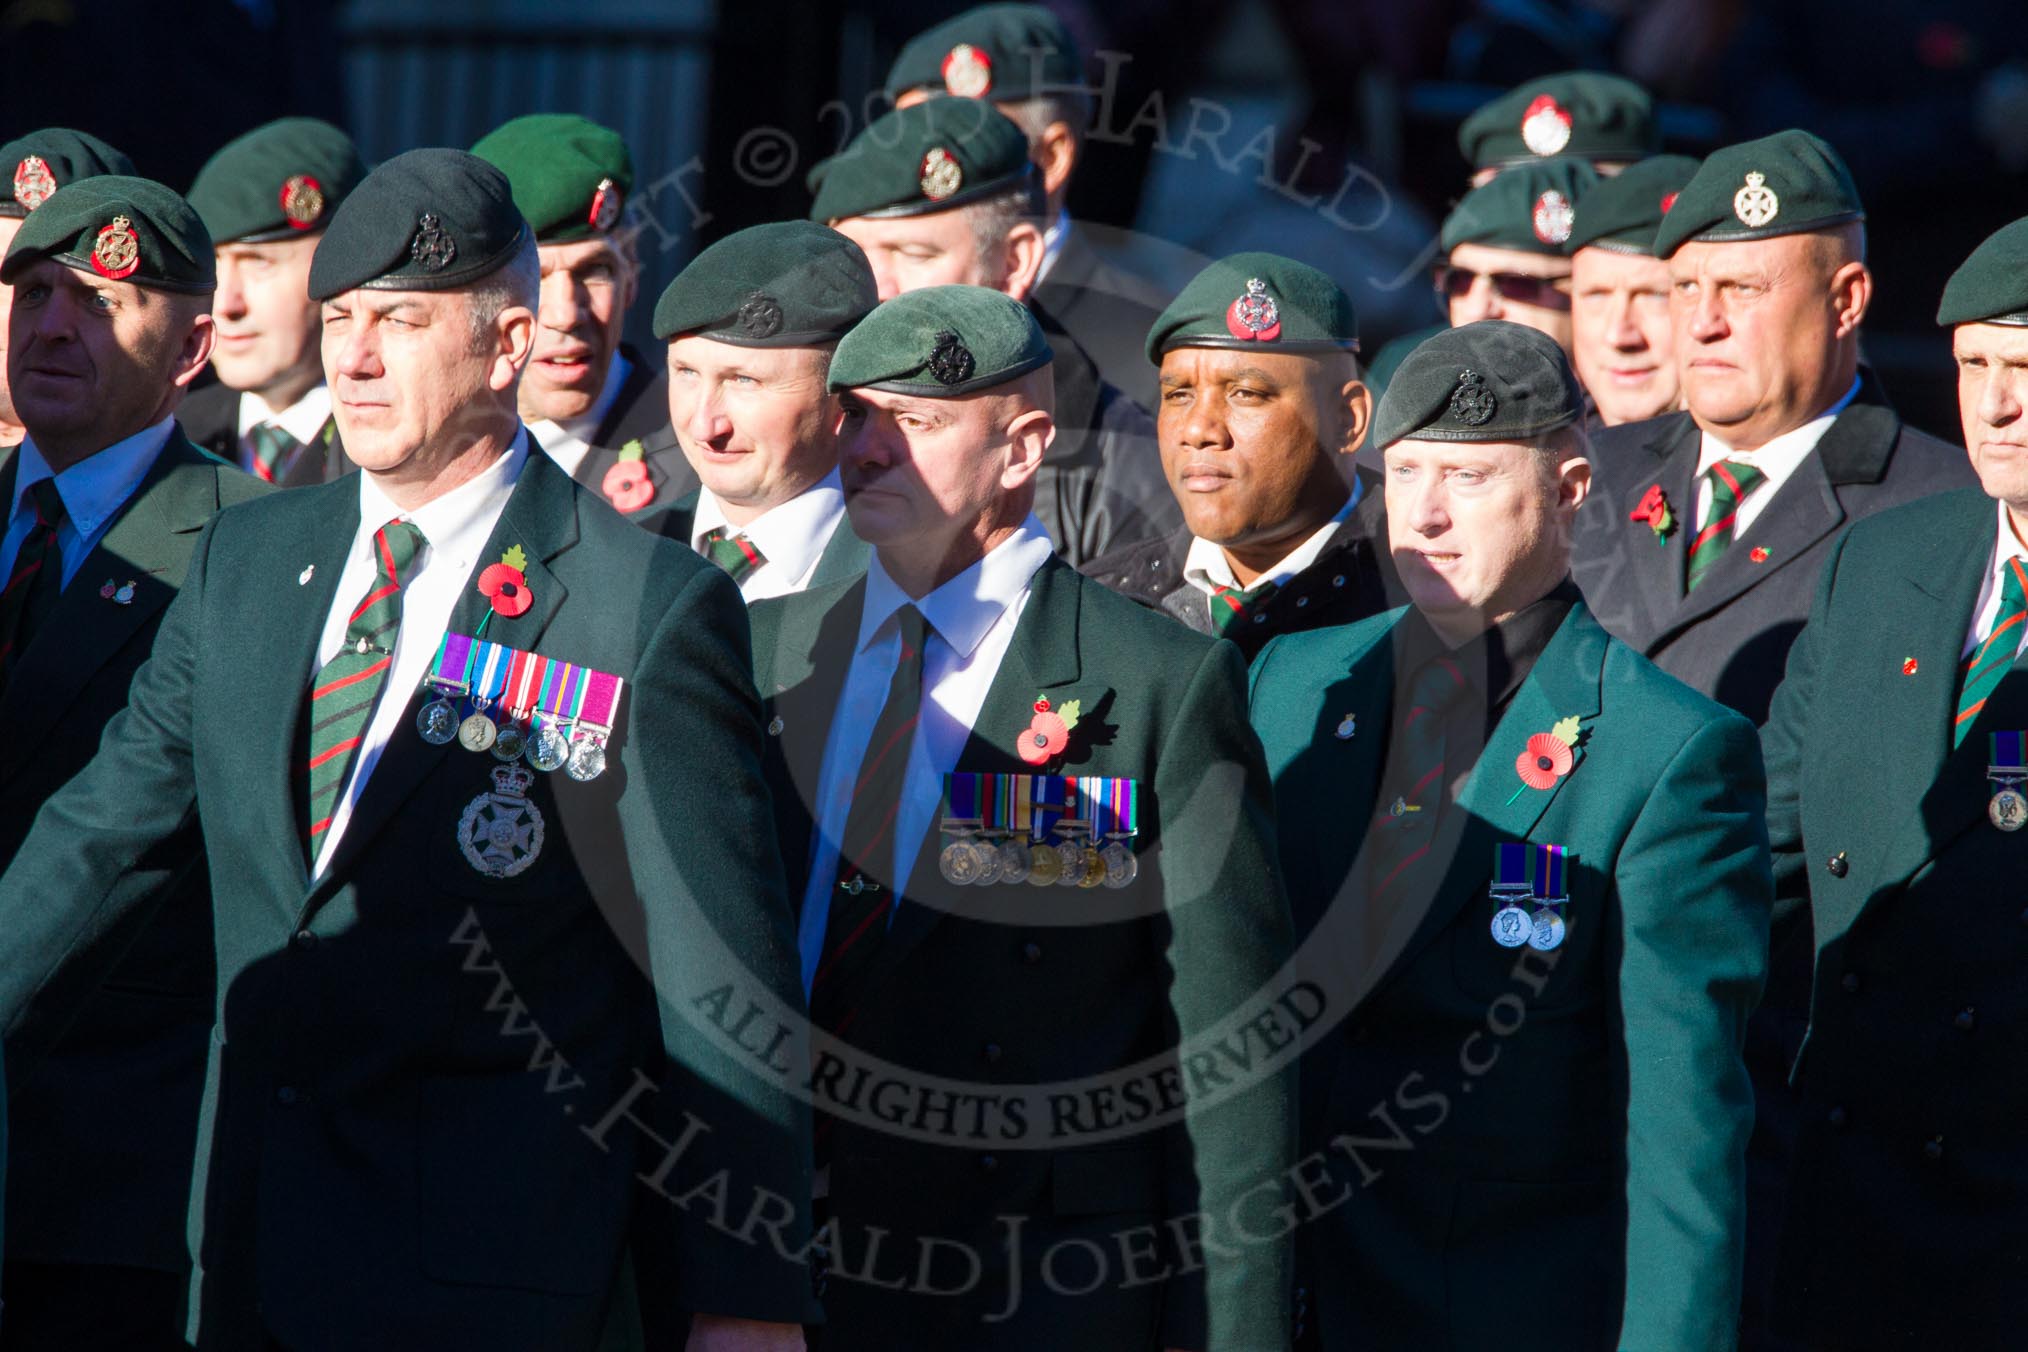 Remembrance Sunday Cenotaph March Past 2013: A16 - Royal Green Jackets Association..
Press stand opposite the Foreign Office building, Whitehall, London SW1,
London,
Greater London,
United Kingdom,
on 10 November 2013 at 11:56, image #1144